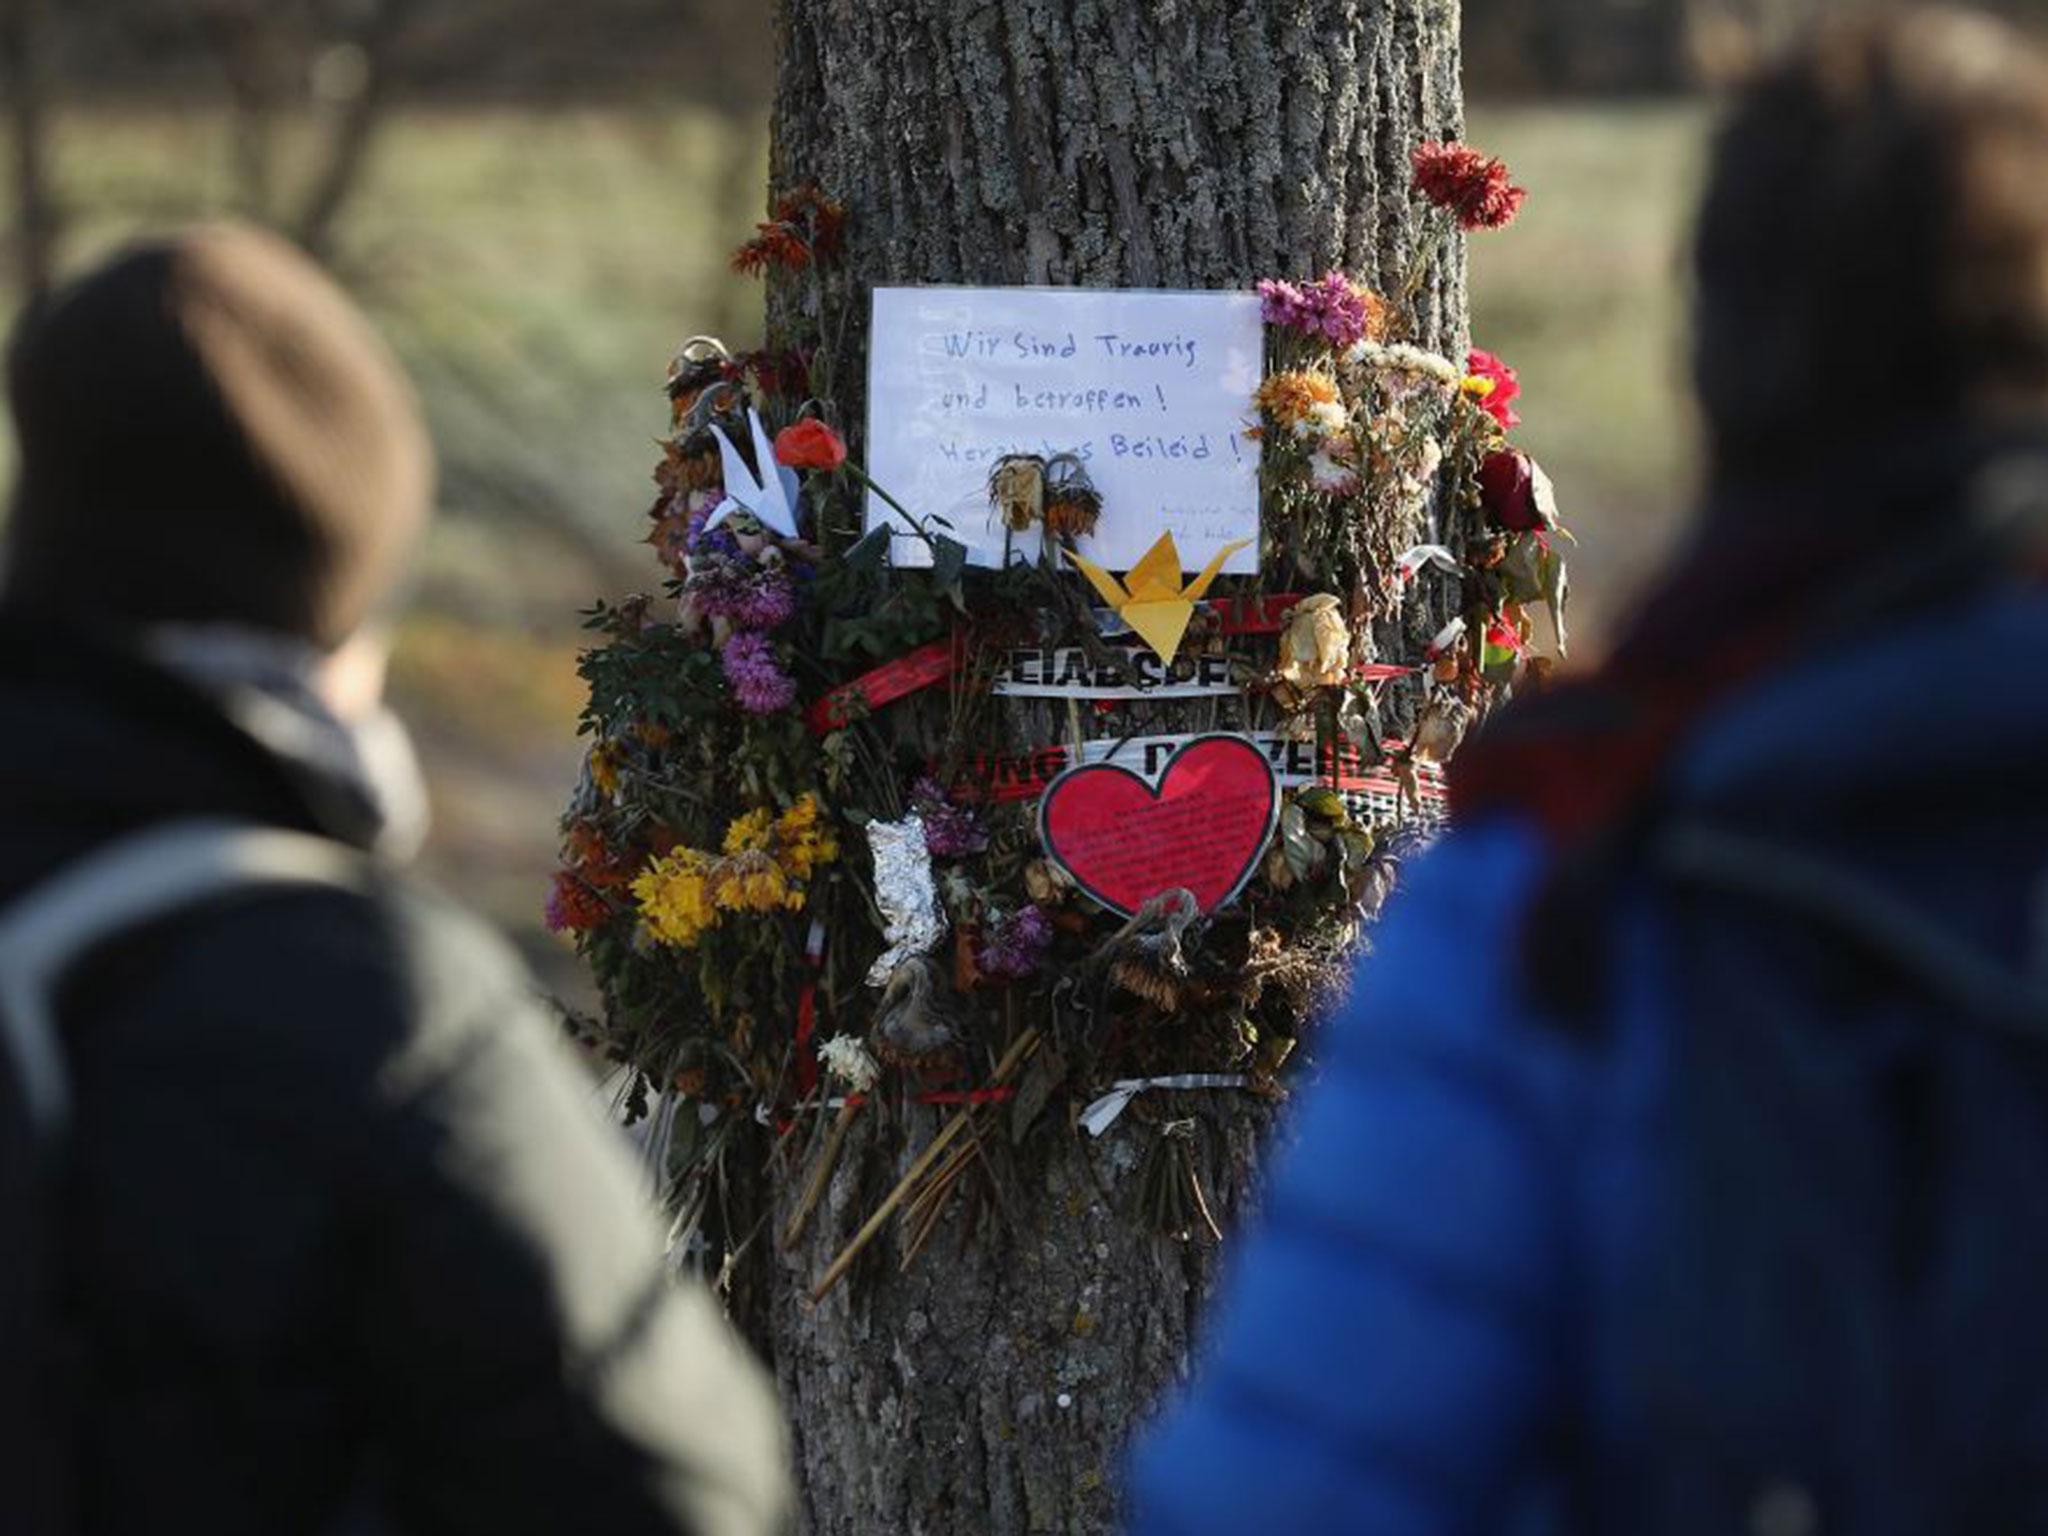 Flowers and messages left where a 19-year-old medical student was raped and murdered on 8 December in Freiburg, Germany